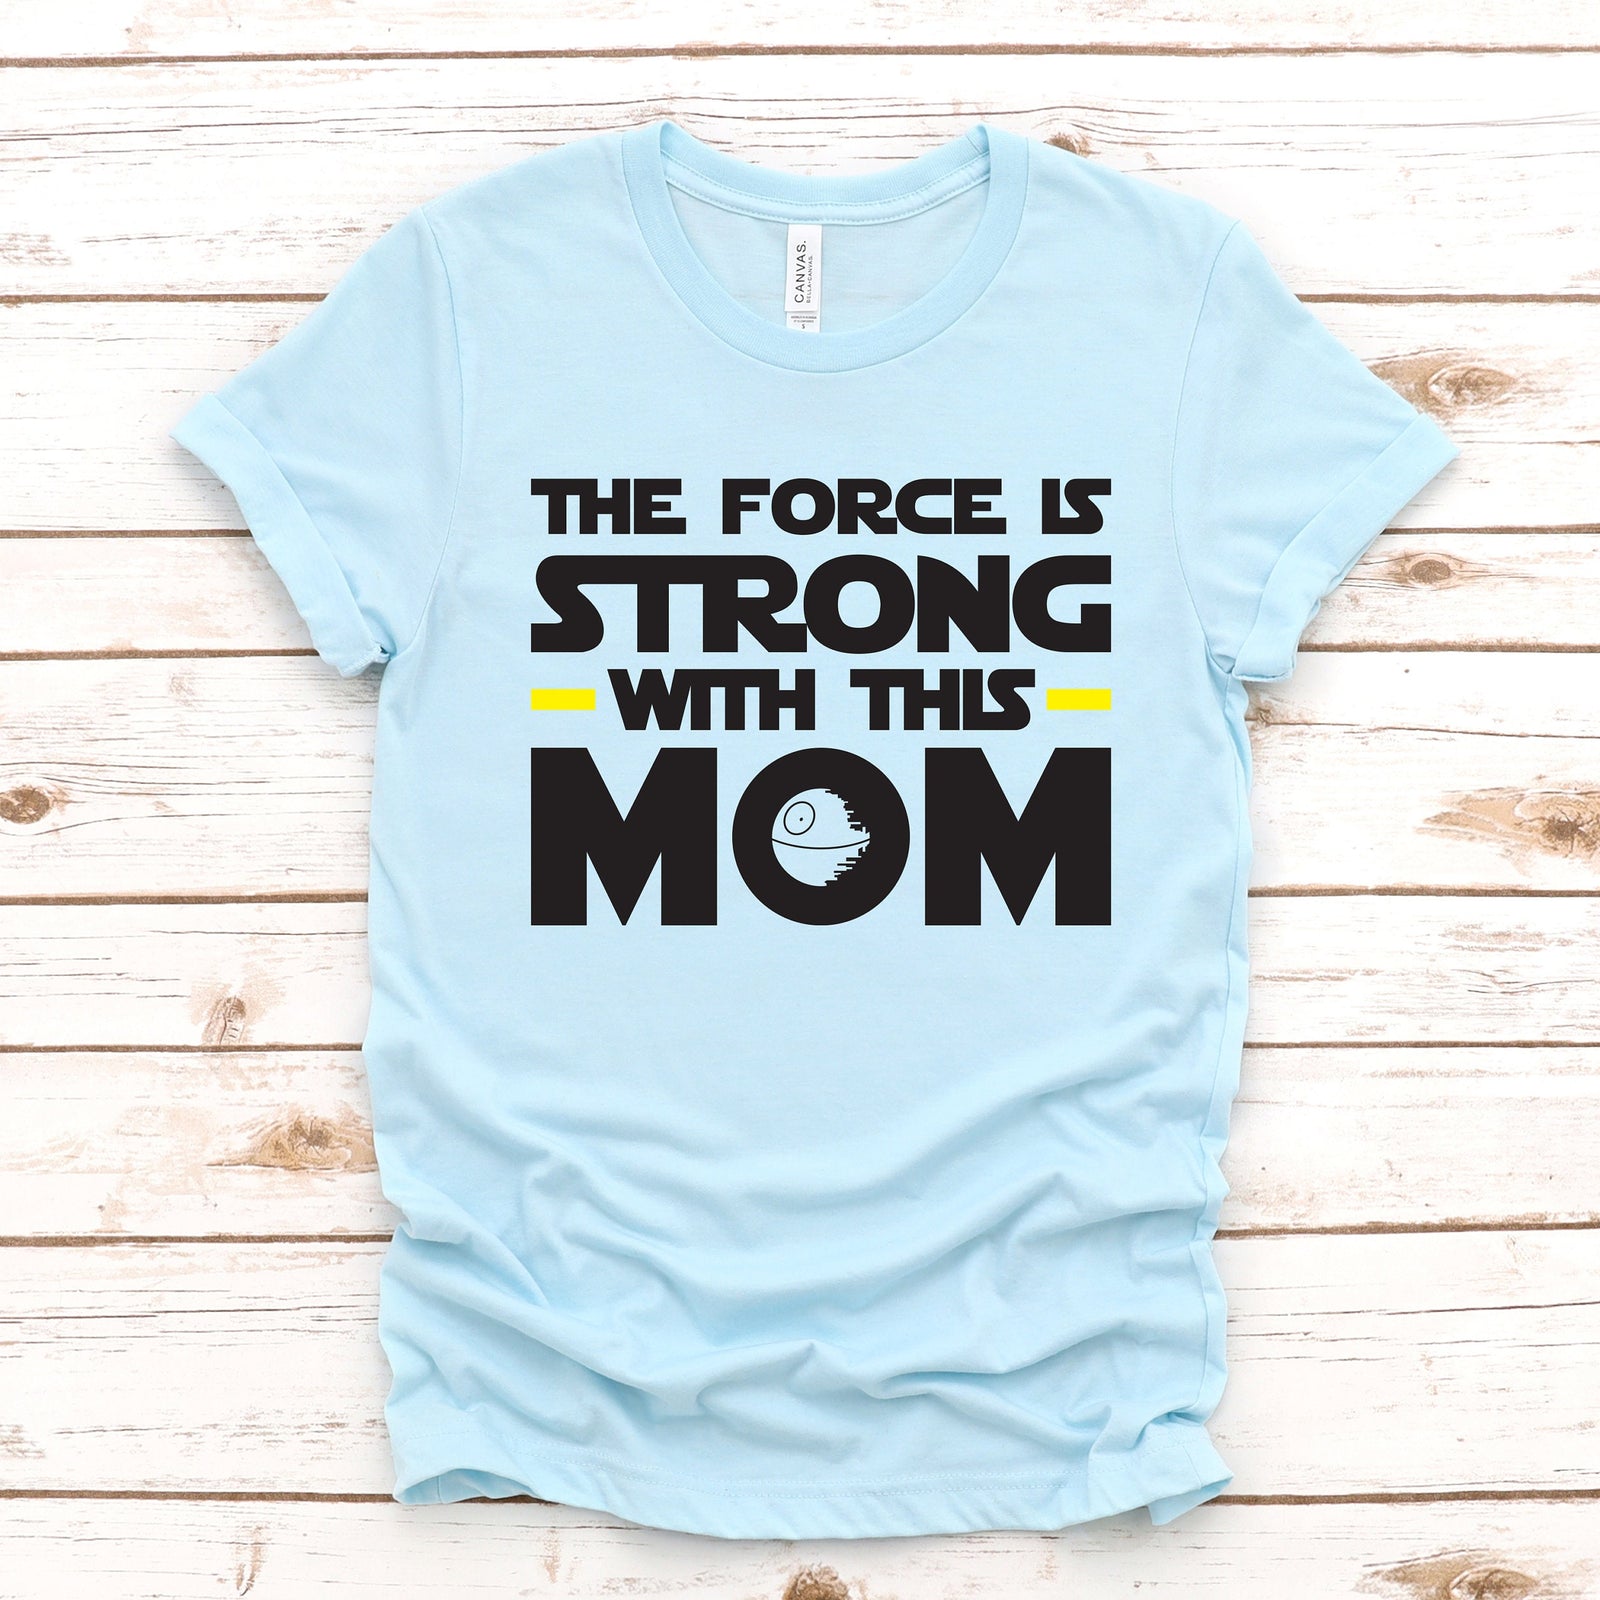 The Force is Strong With this Mom - Star Wars Adult T Shirt -Light Saber